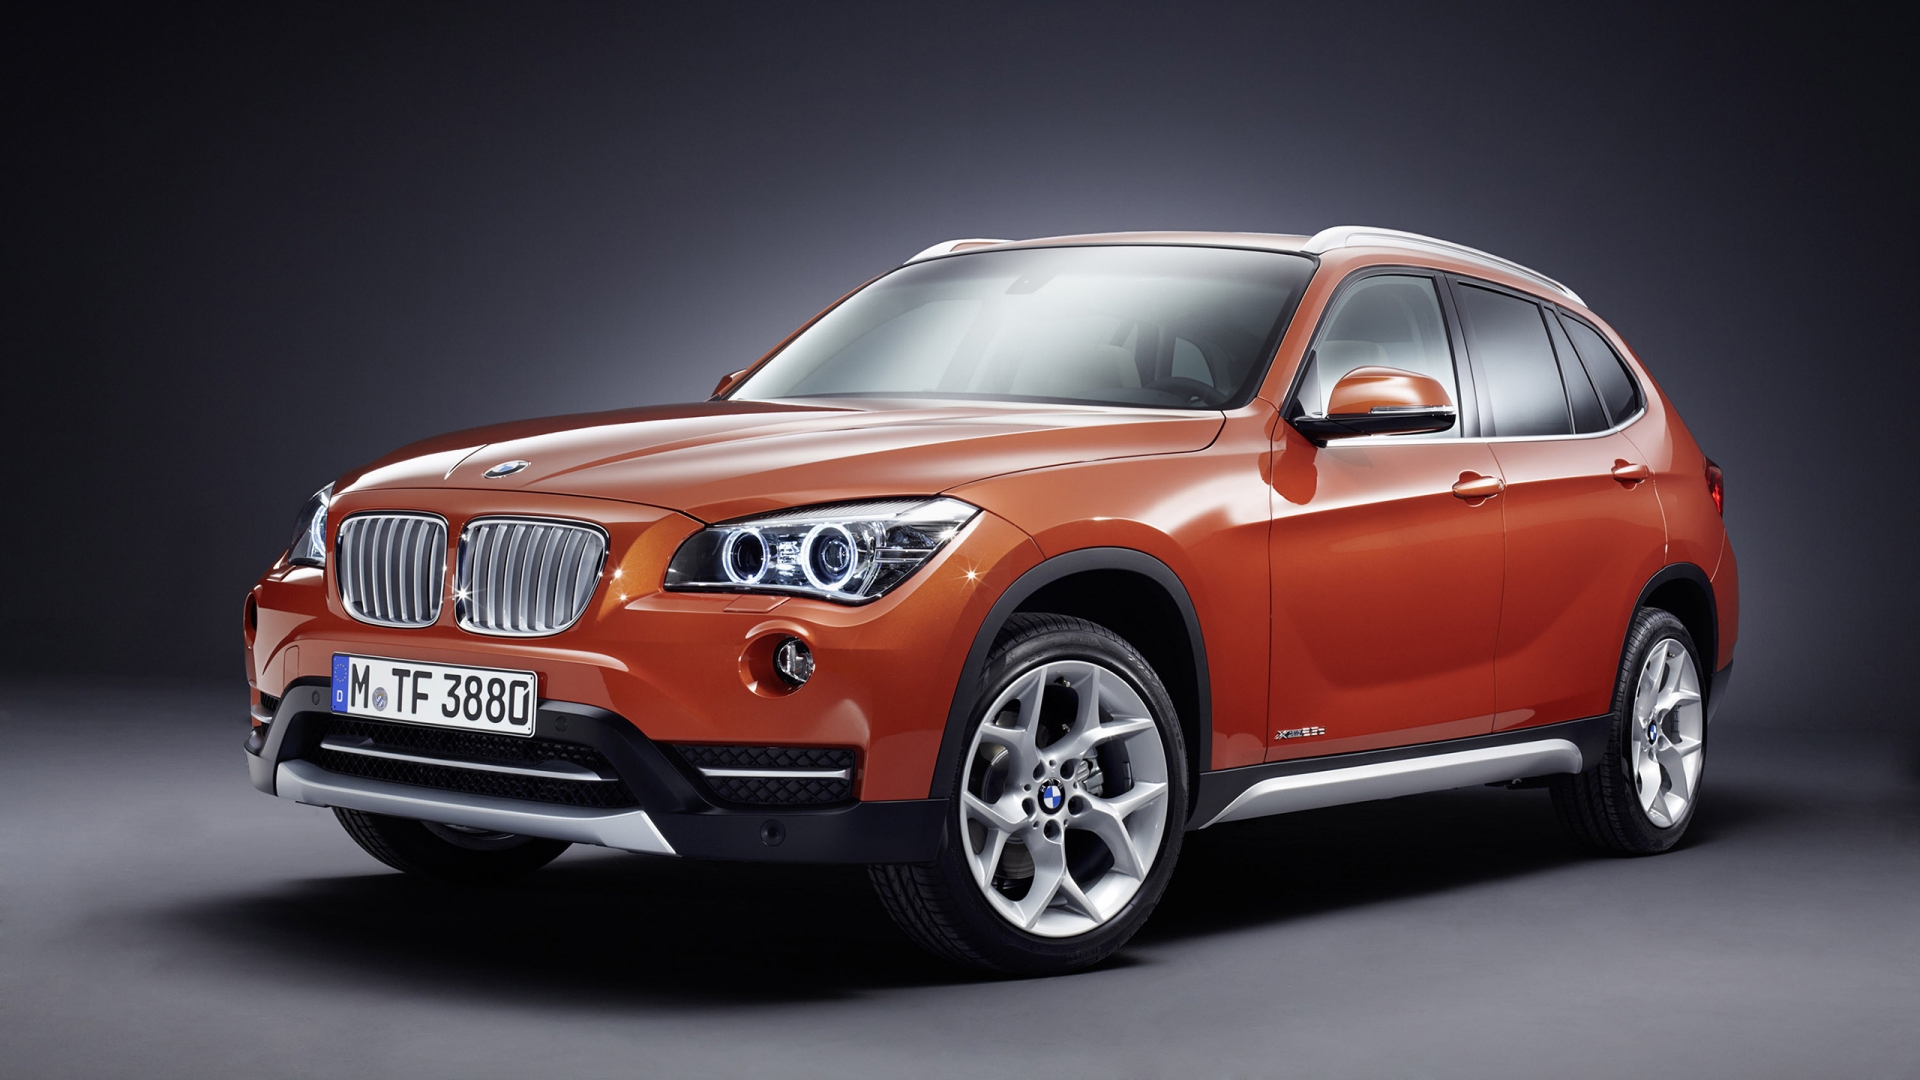 2013 BMW X1 for 1920 x 1080 HDTV 1080p resolution